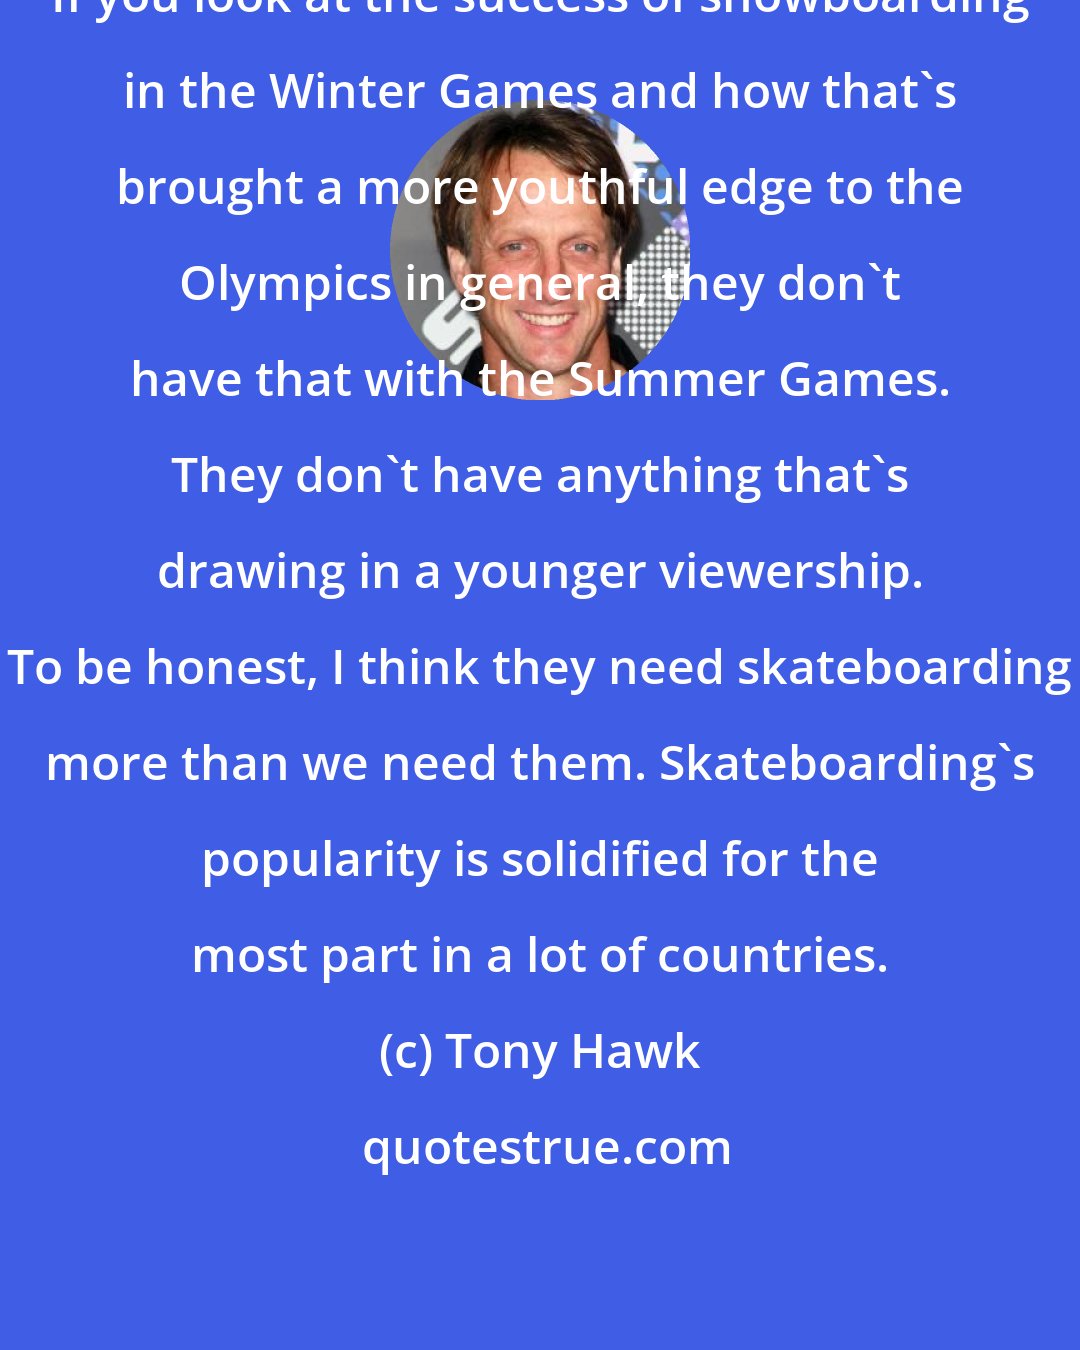 Tony Hawk: If you look at the success of snowboarding in the Winter Games and how that's brought a more youthful edge to the Olympics in general, they don't have that with the Summer Games. They don't have anything that's drawing in a younger viewership. To be honest, I think they need skateboarding more than we need them. Skateboarding's popularity is solidified for the most part in a lot of countries.